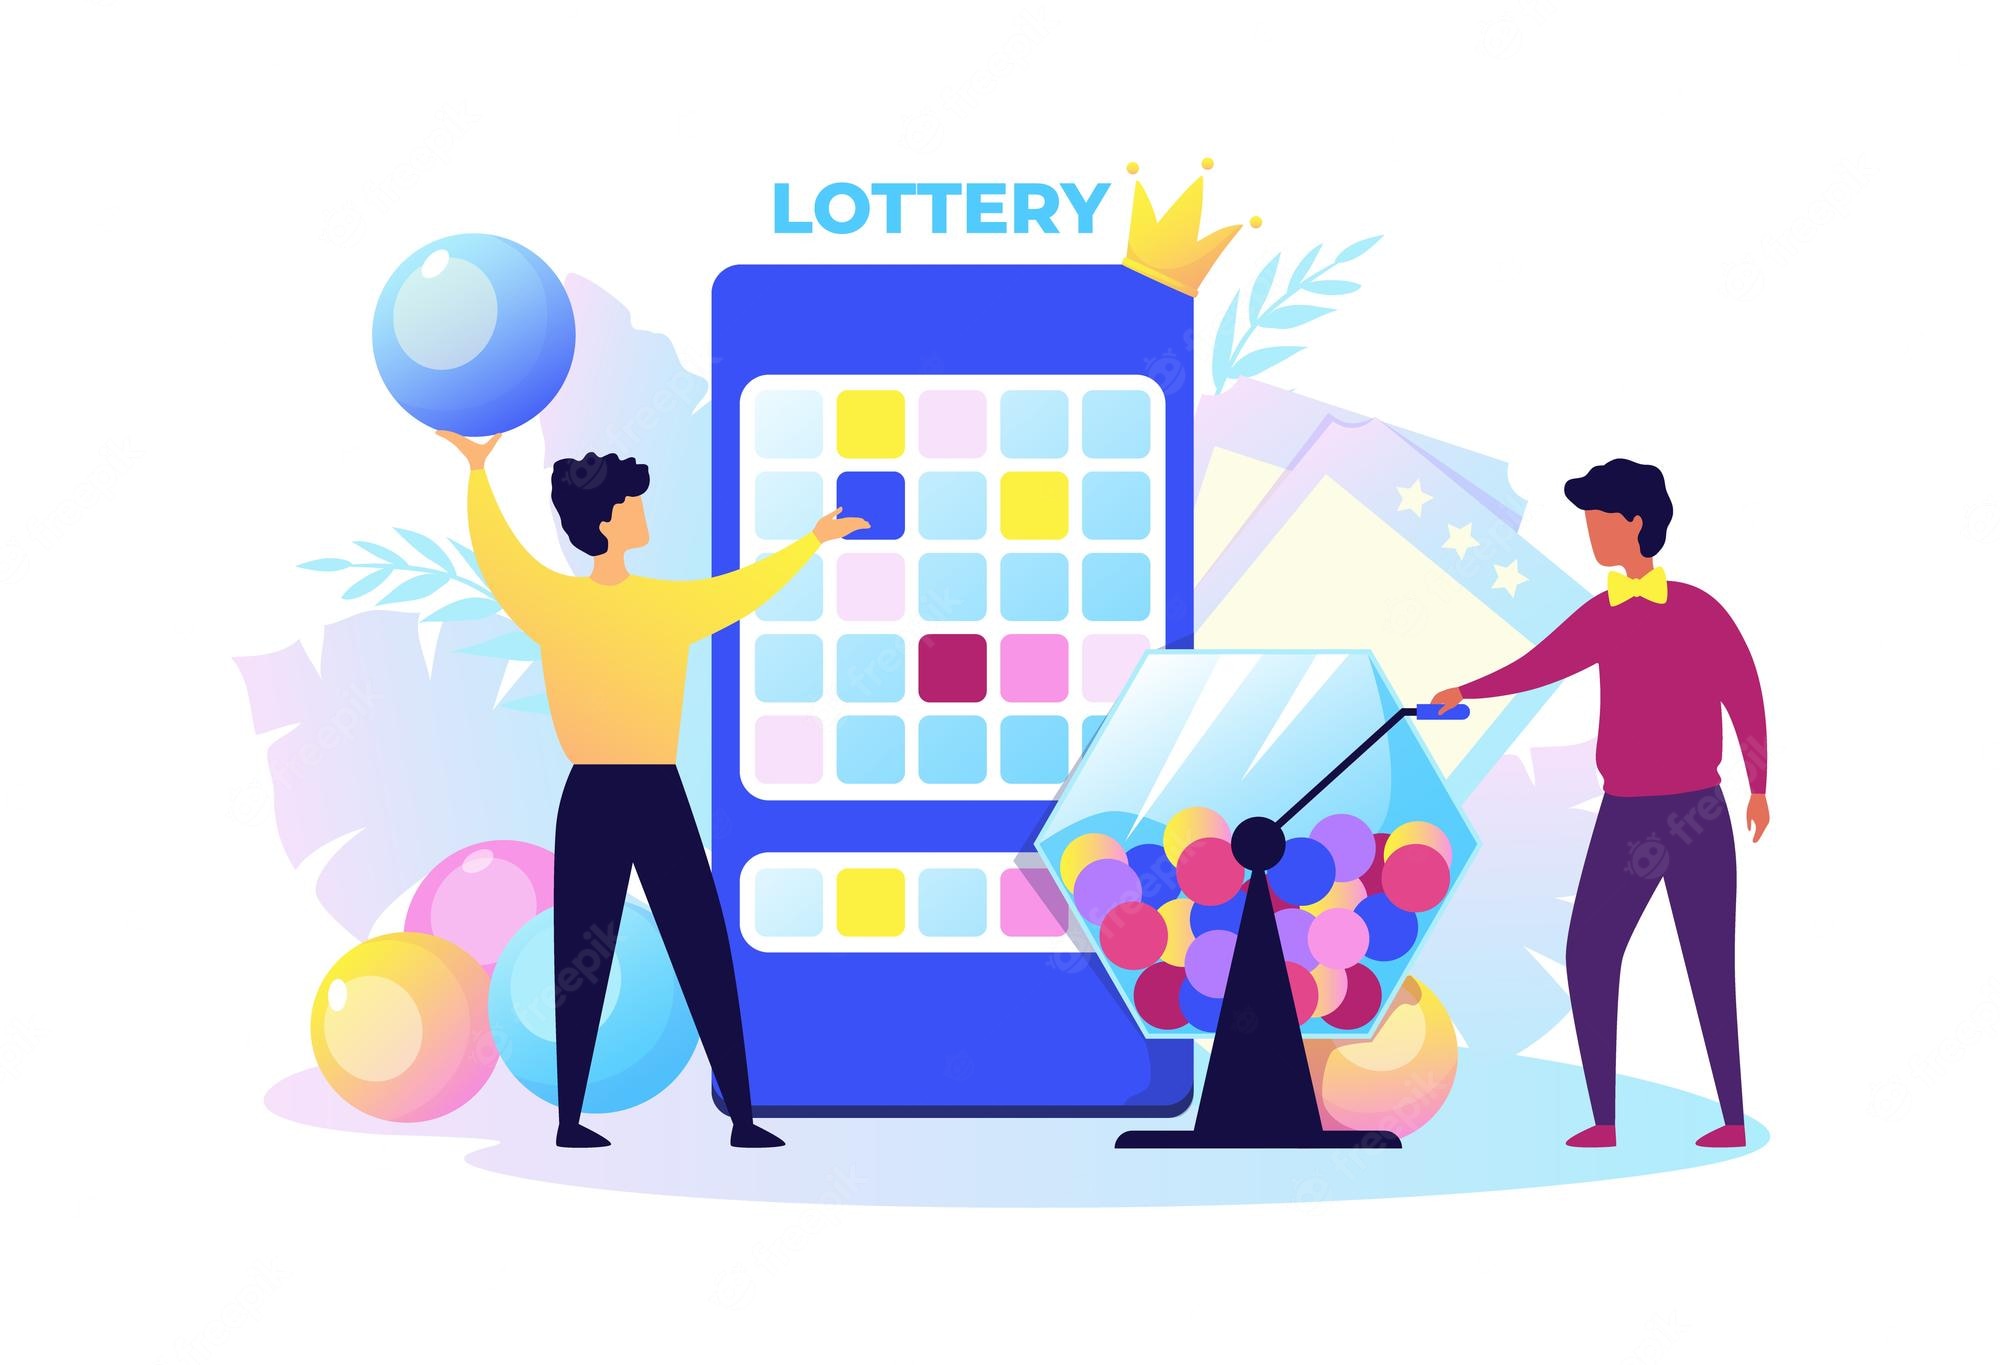 Lotto ticket Images | Free Vectors, Stock Photos & PSD | Page 2